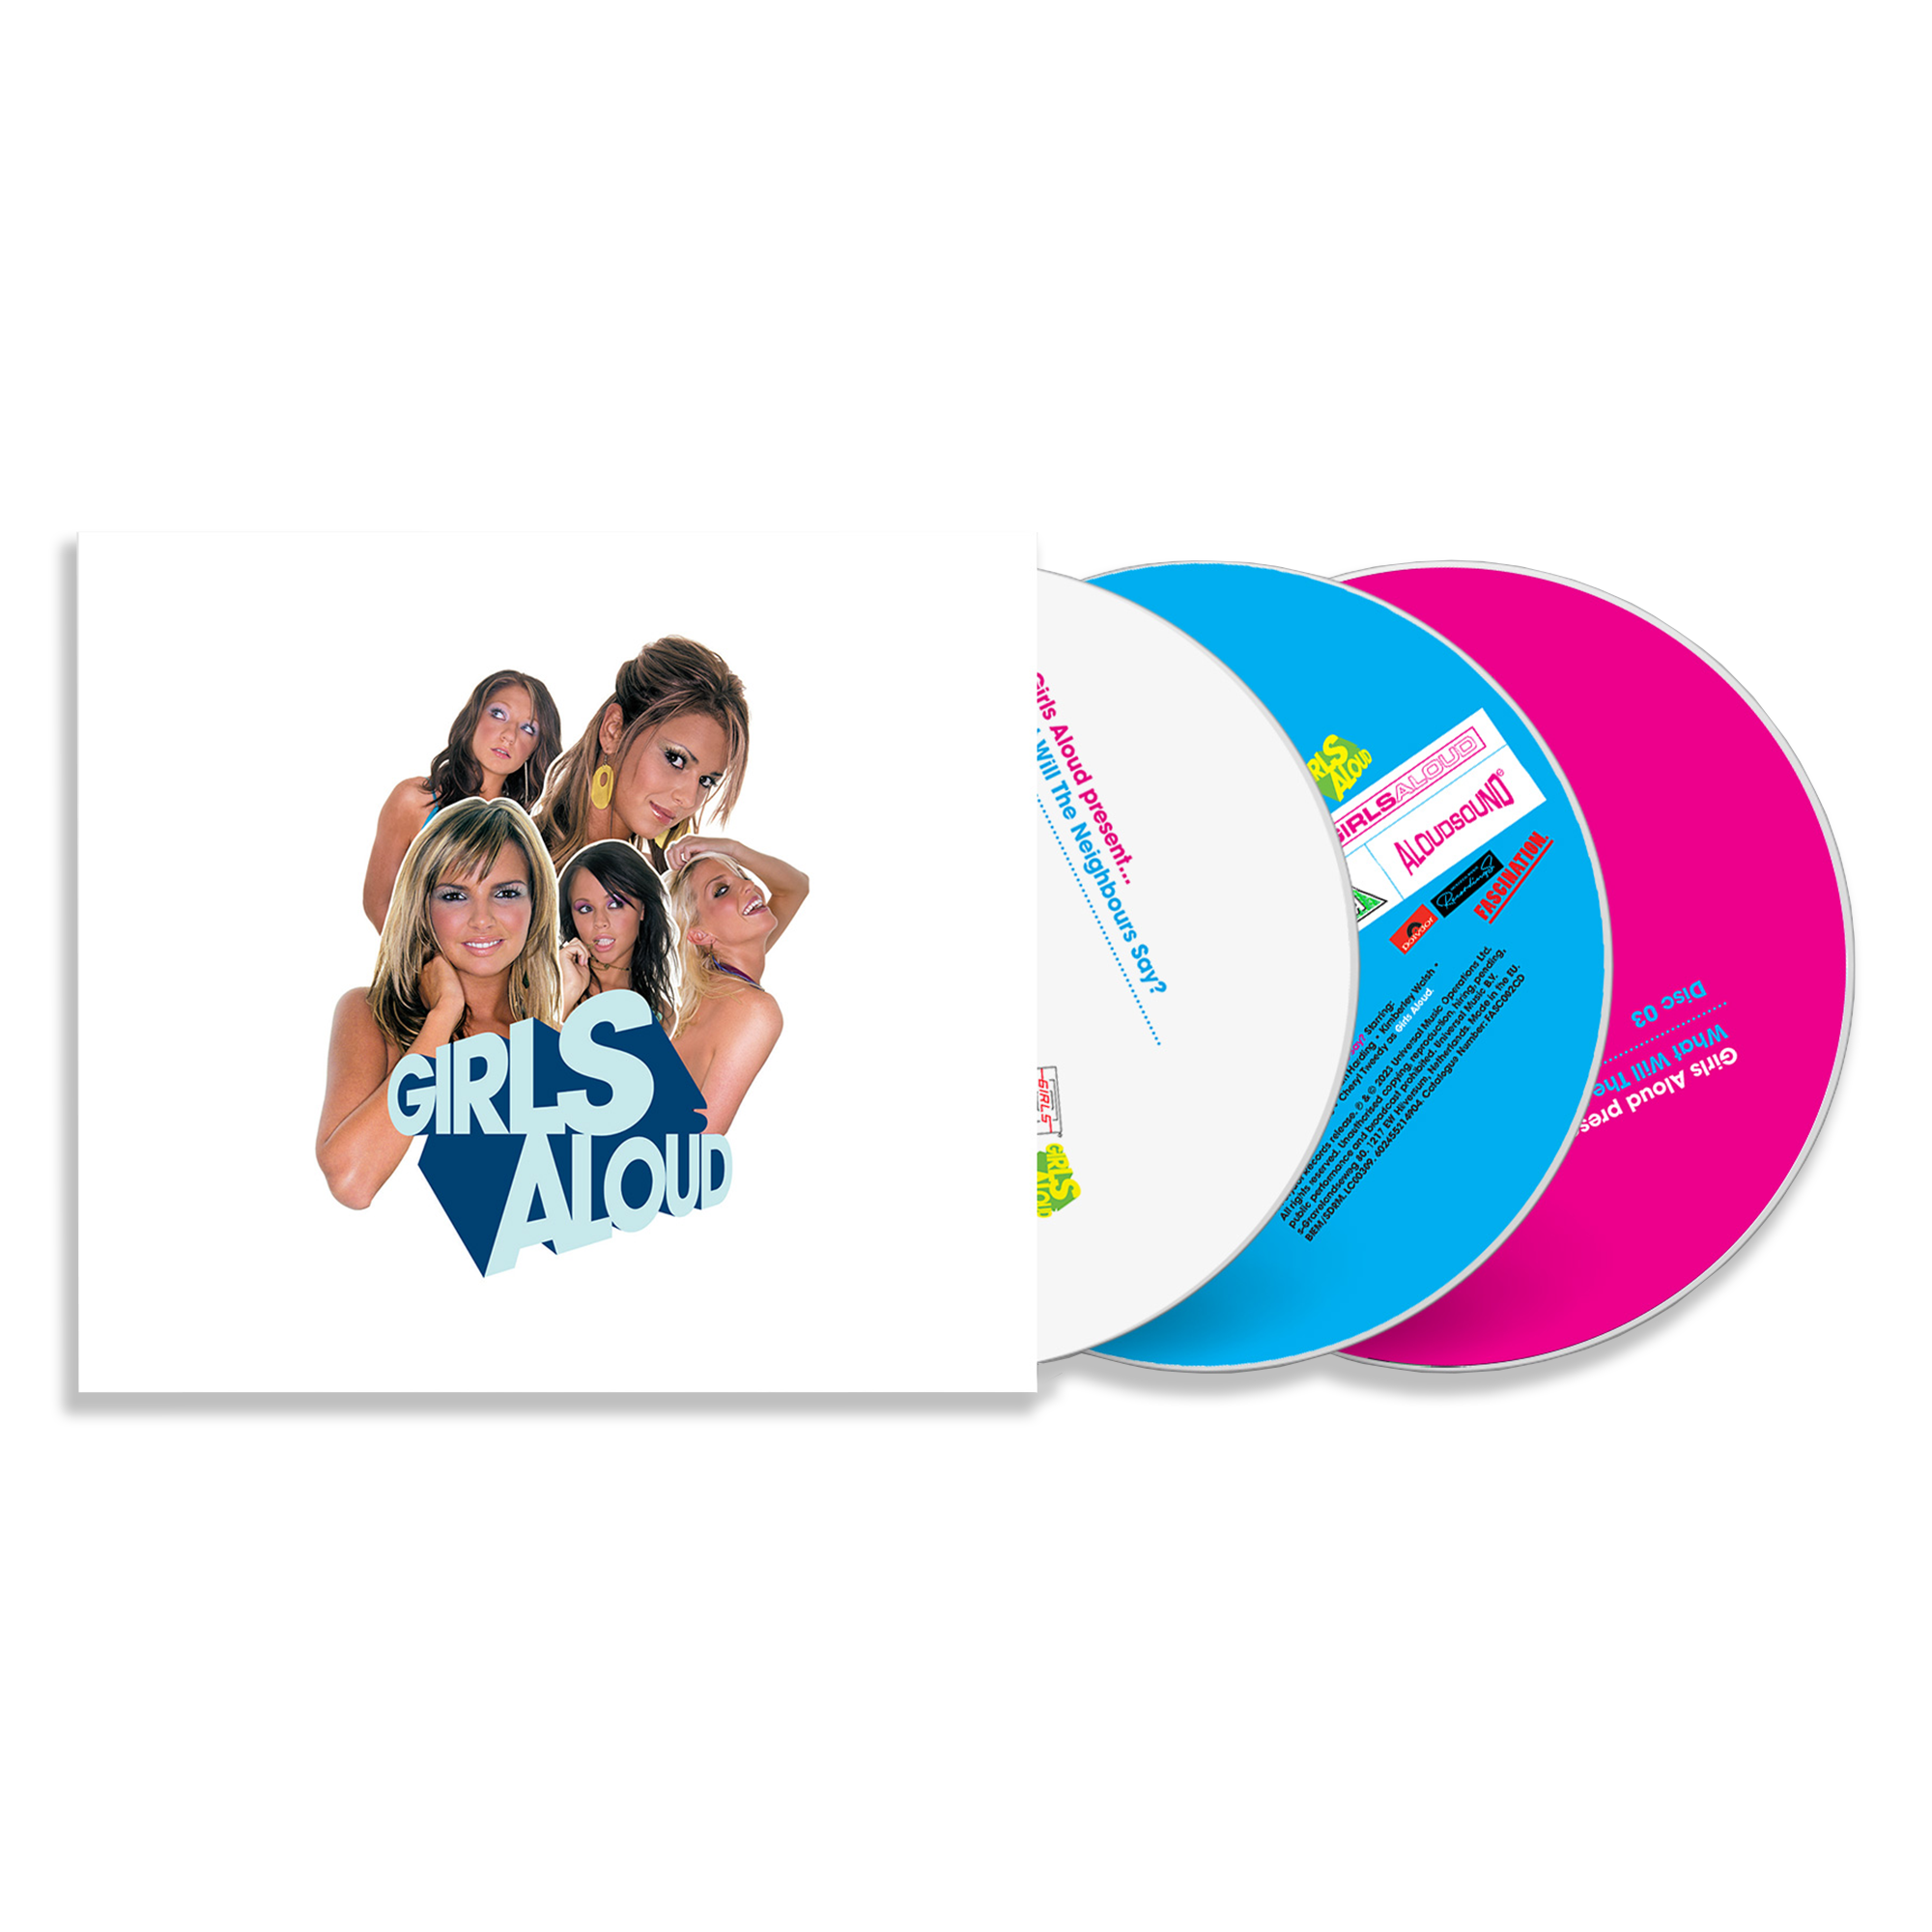 What Will The Neighbours Say? (Deluxe Edition): Blue Vinyl, Picture Disc, 3CD & Sticker Sheet Bundle